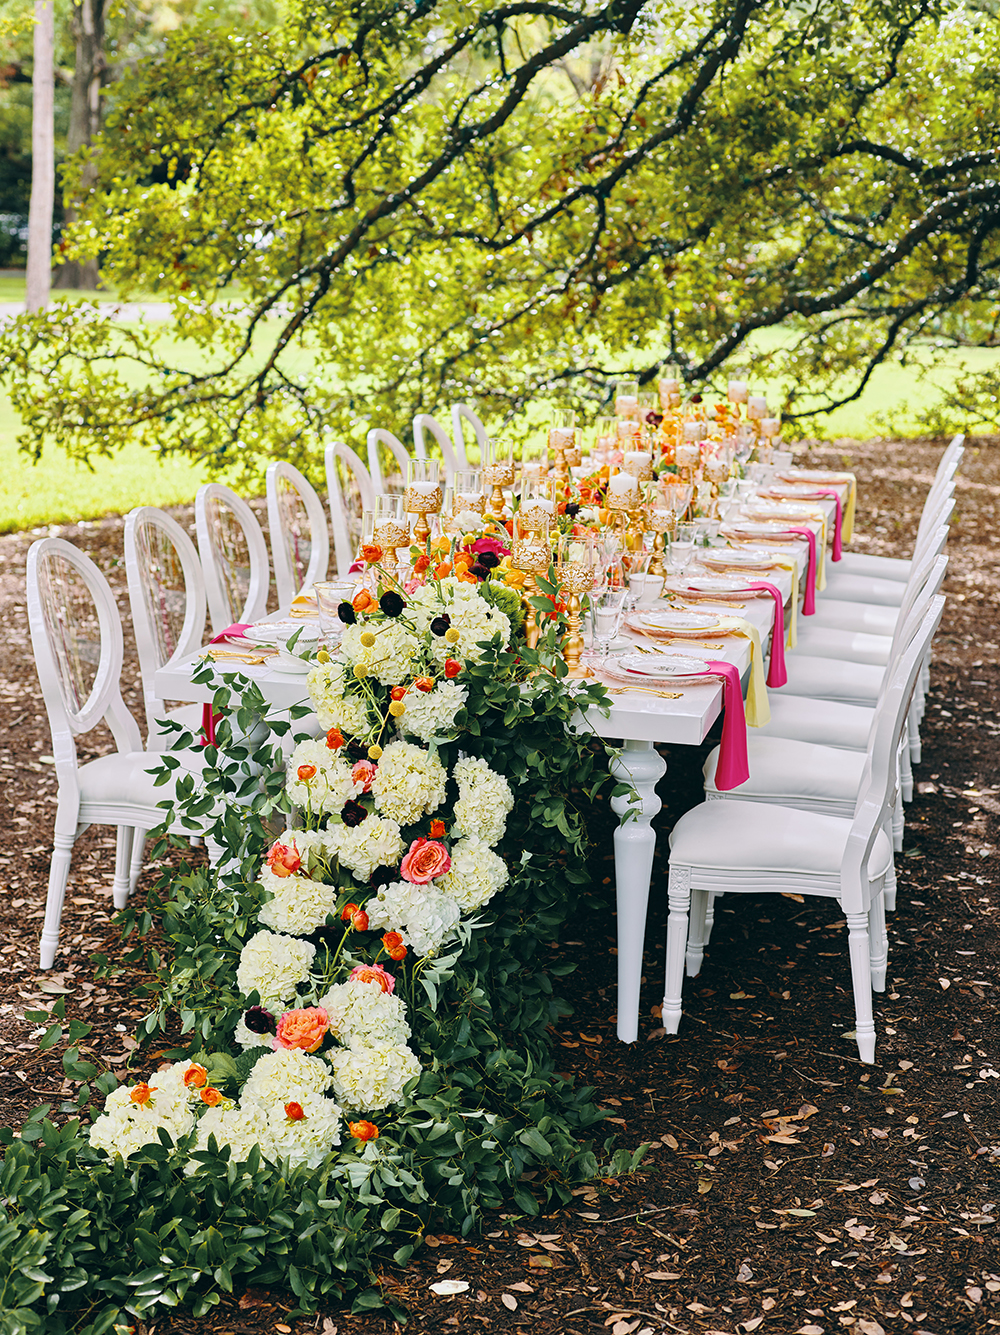 tablescape decor and flowers